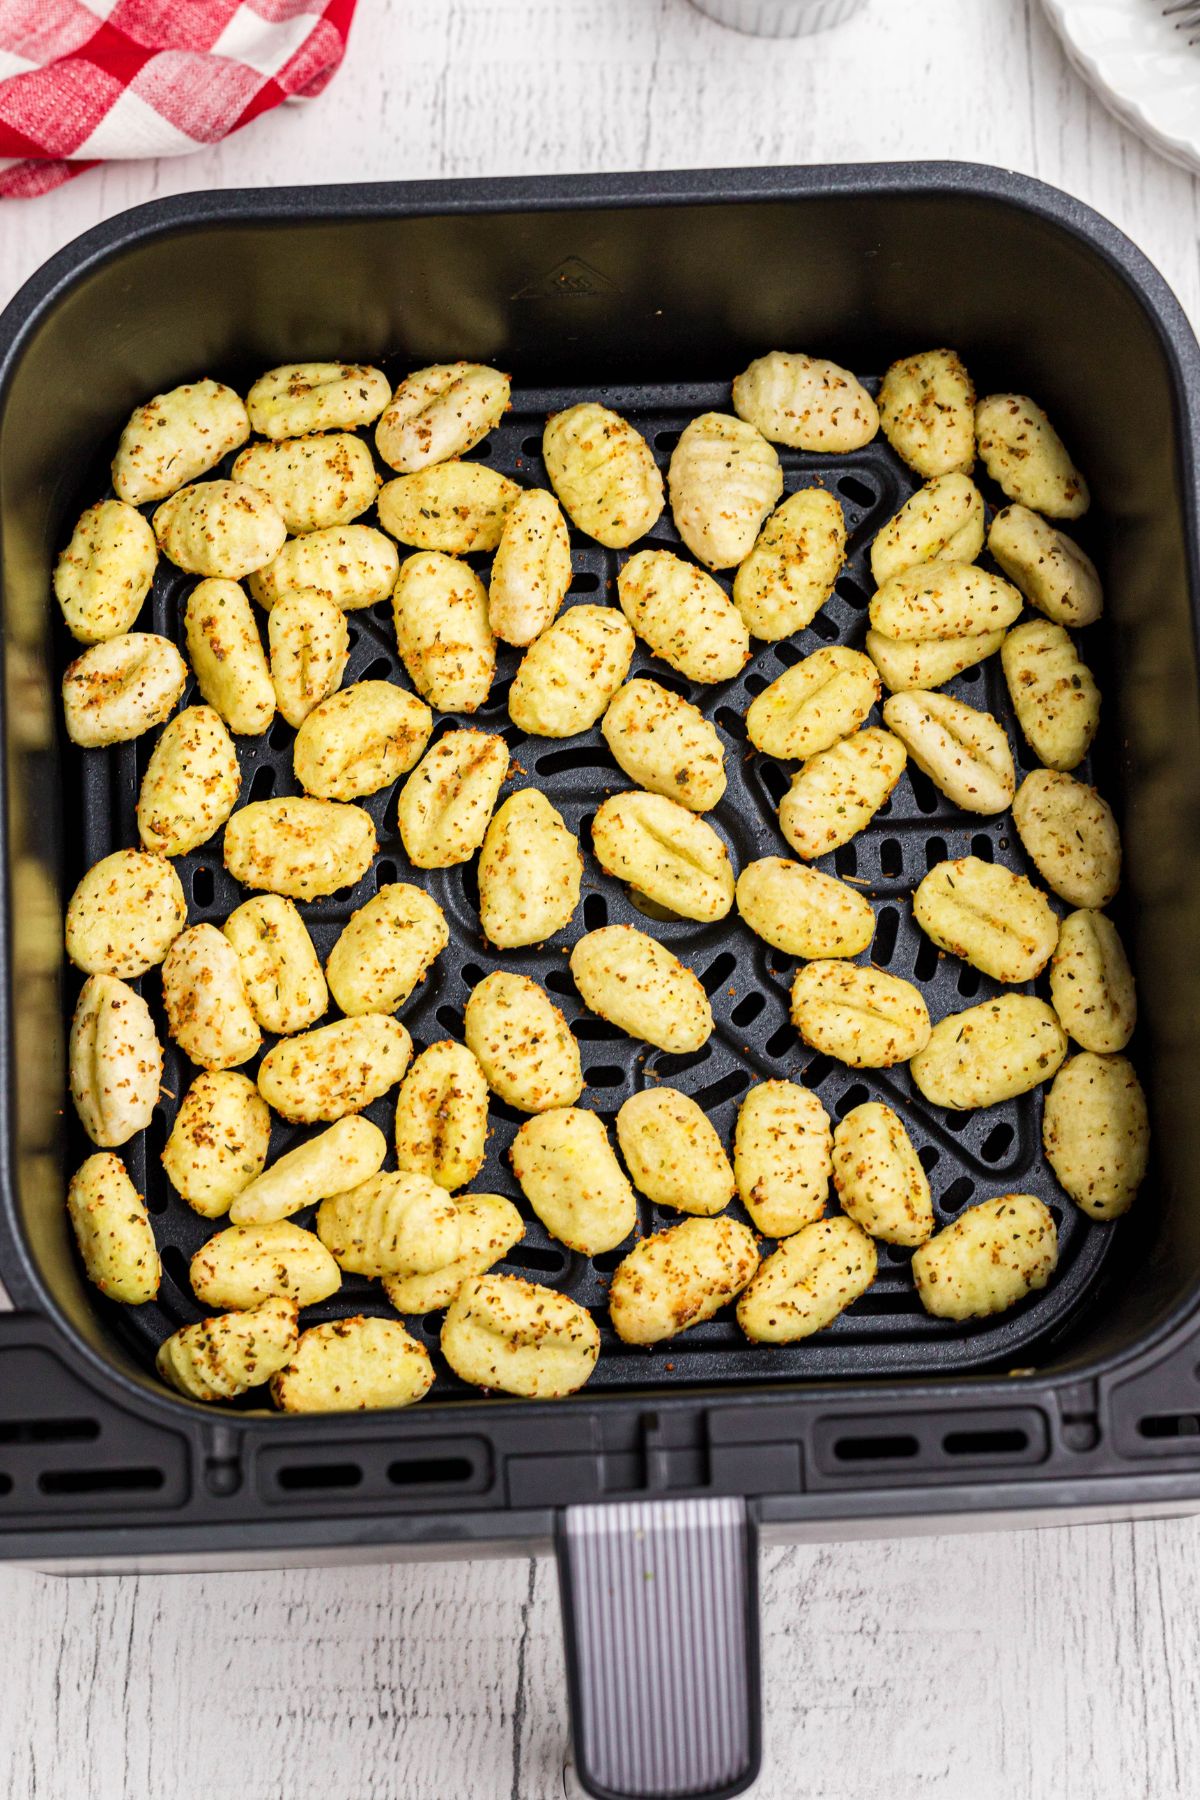 Golden crispy seasoned gnocci in the air fryer basket after air frying.